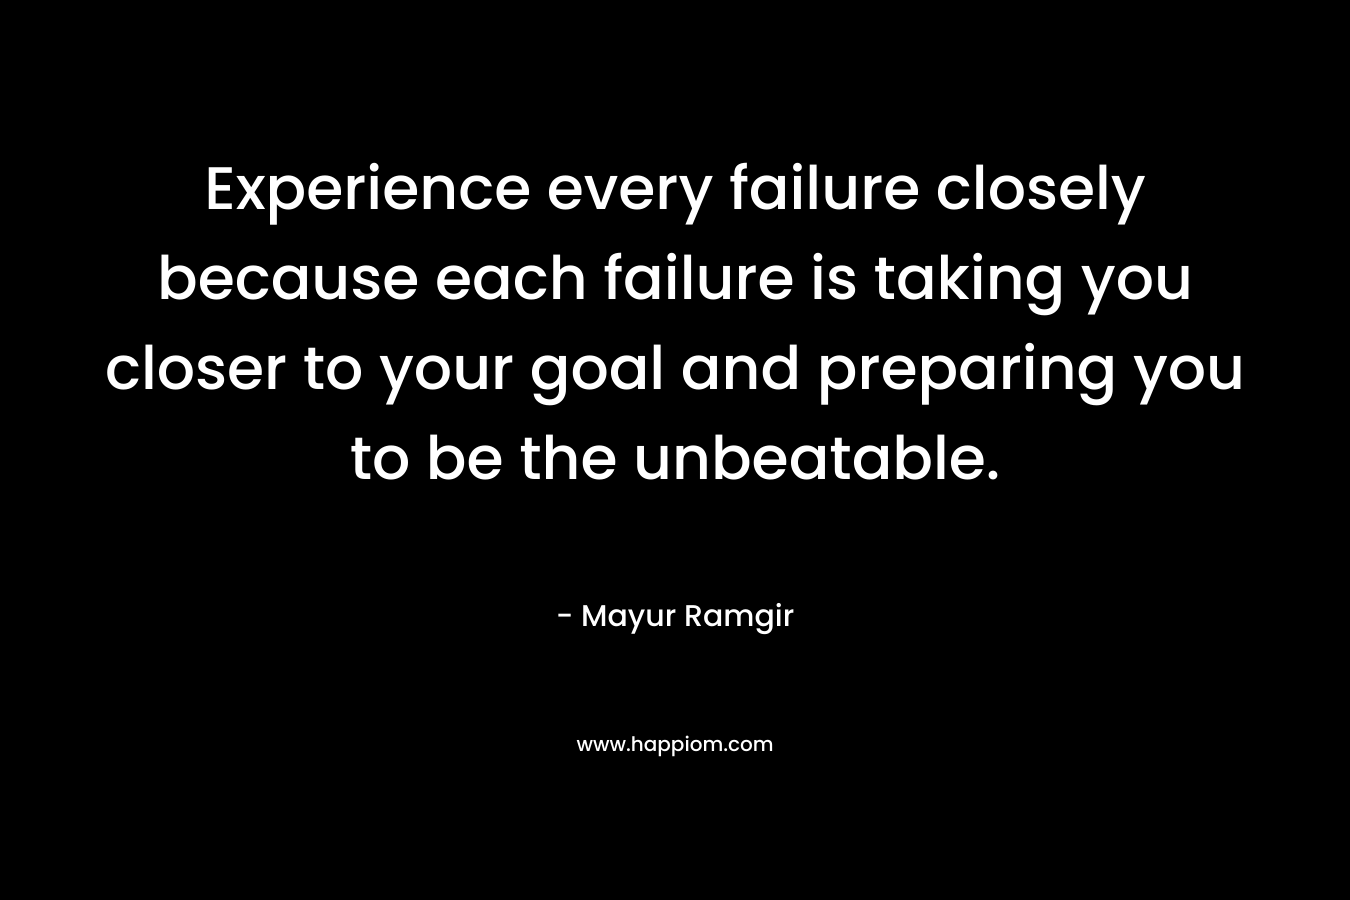 Experience every failure closely because each failure is taking you closer to your goal and preparing you to be the unbeatable. – Mayur Ramgir